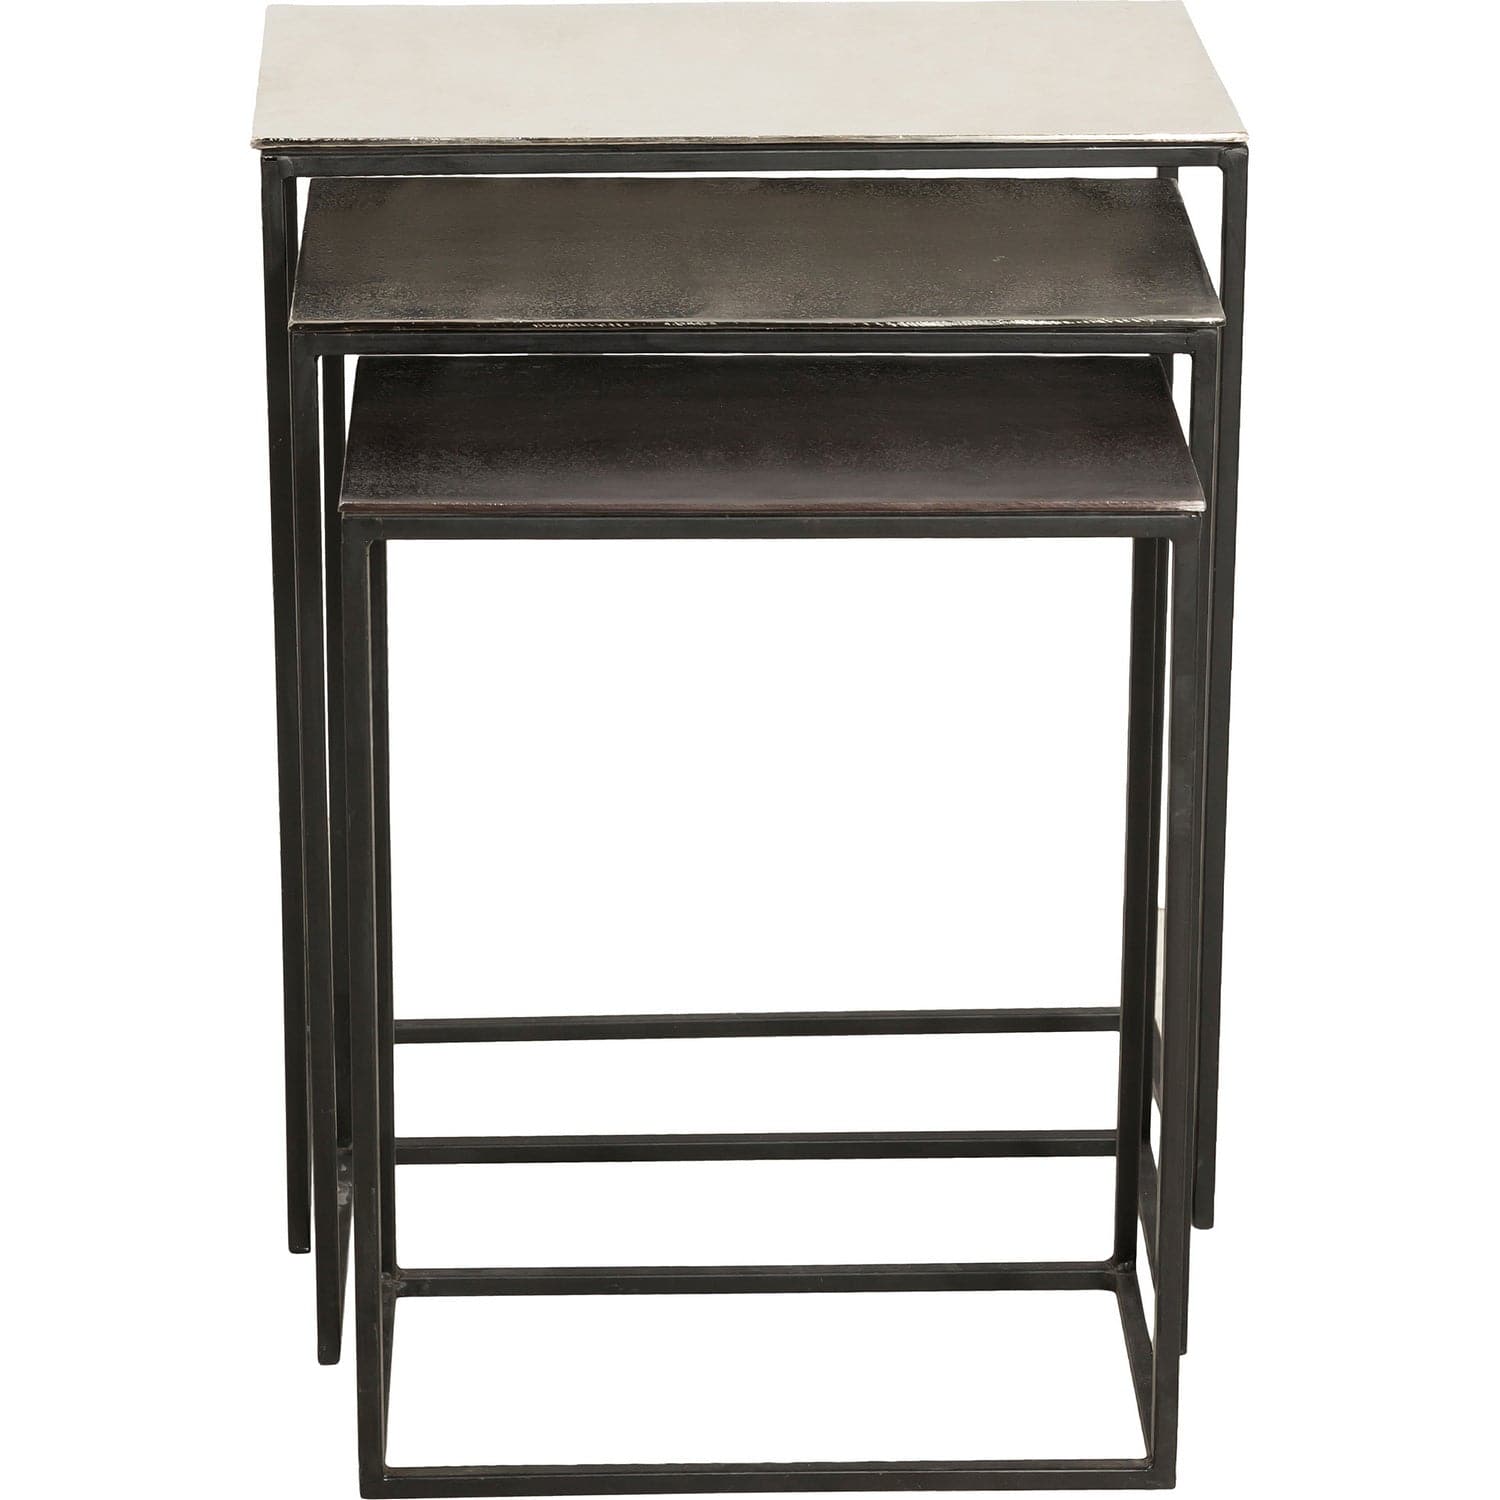 Renwil - TA298 - Furniture - Accent Tables